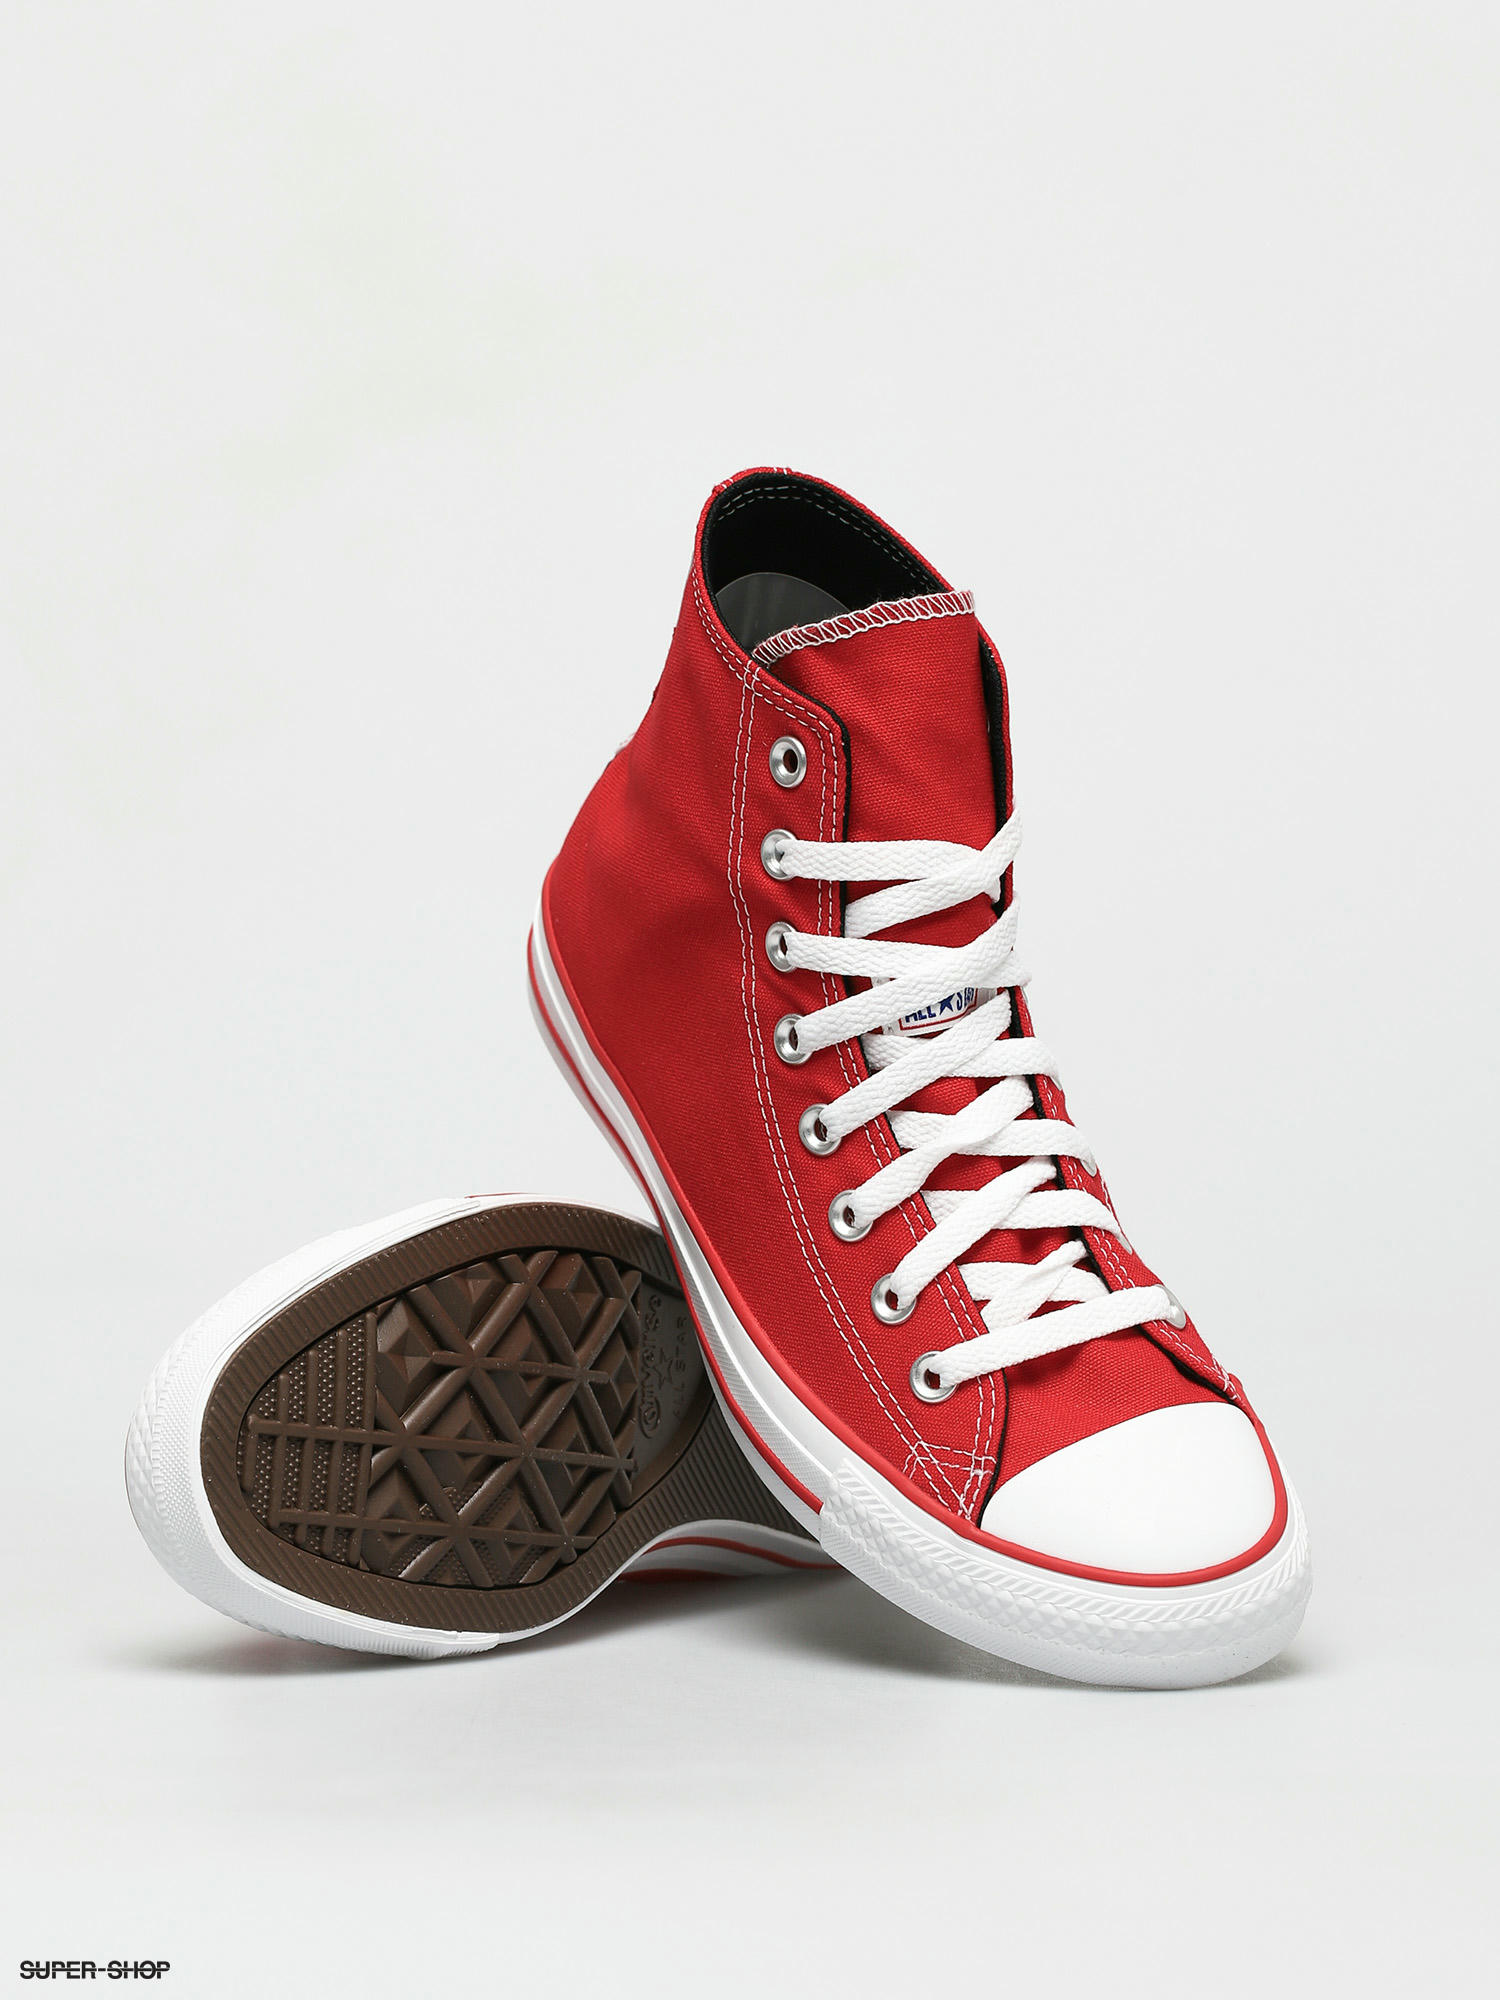 red leather chuck taylors